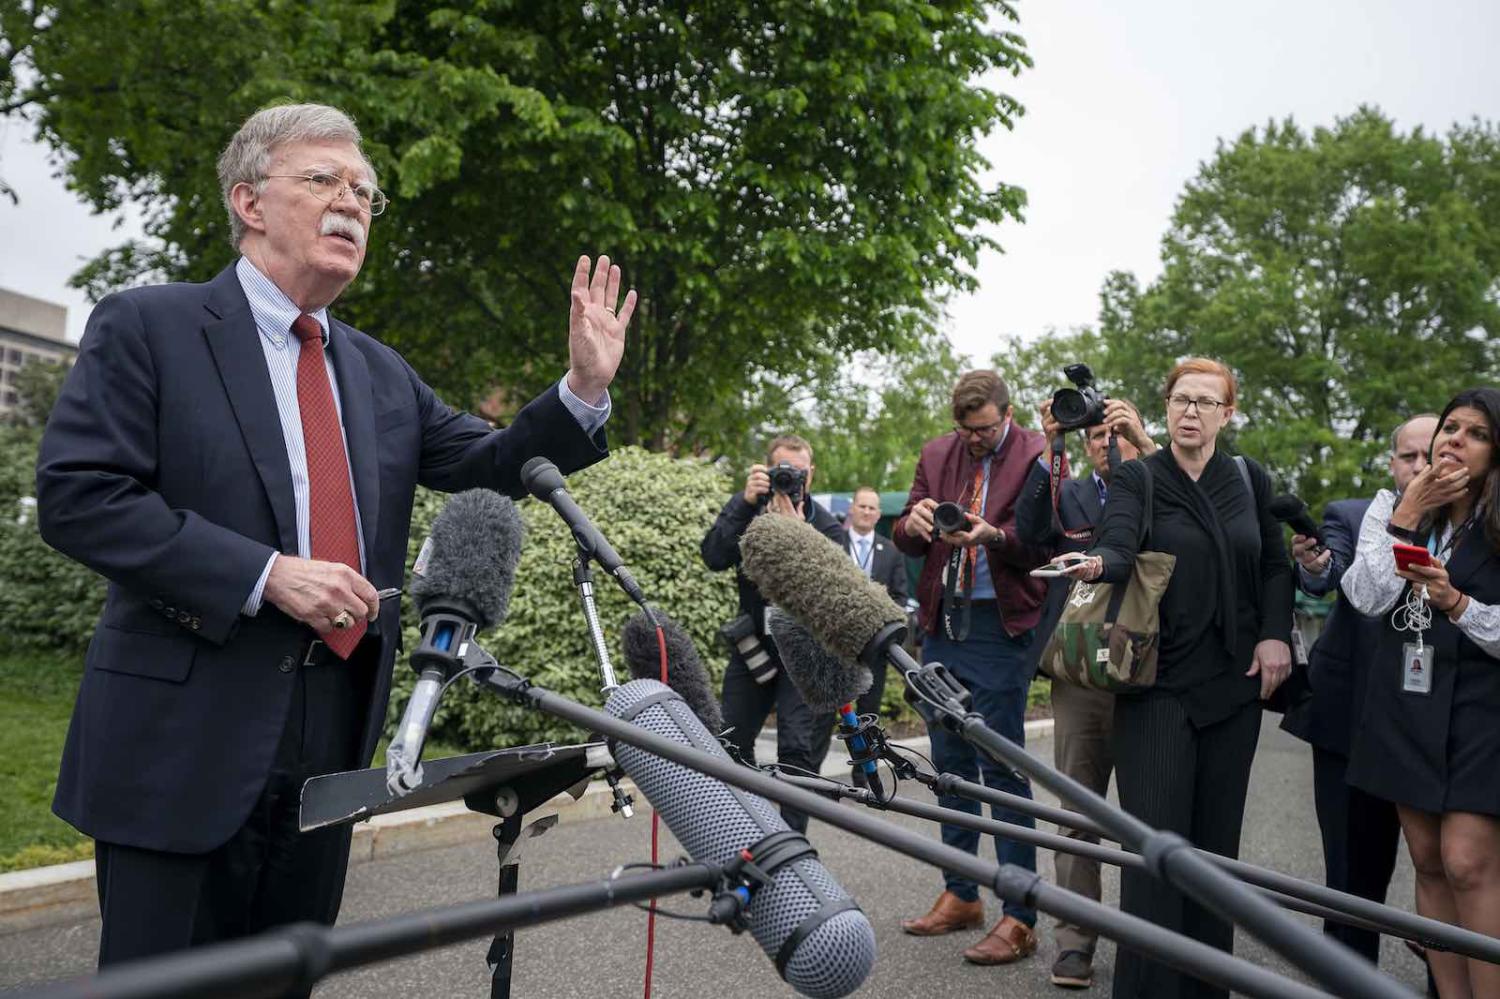 National Security Advisor John Bolton speaks to reporters outside the West Wing, May 2019 (Photo: The White House/Flickr)